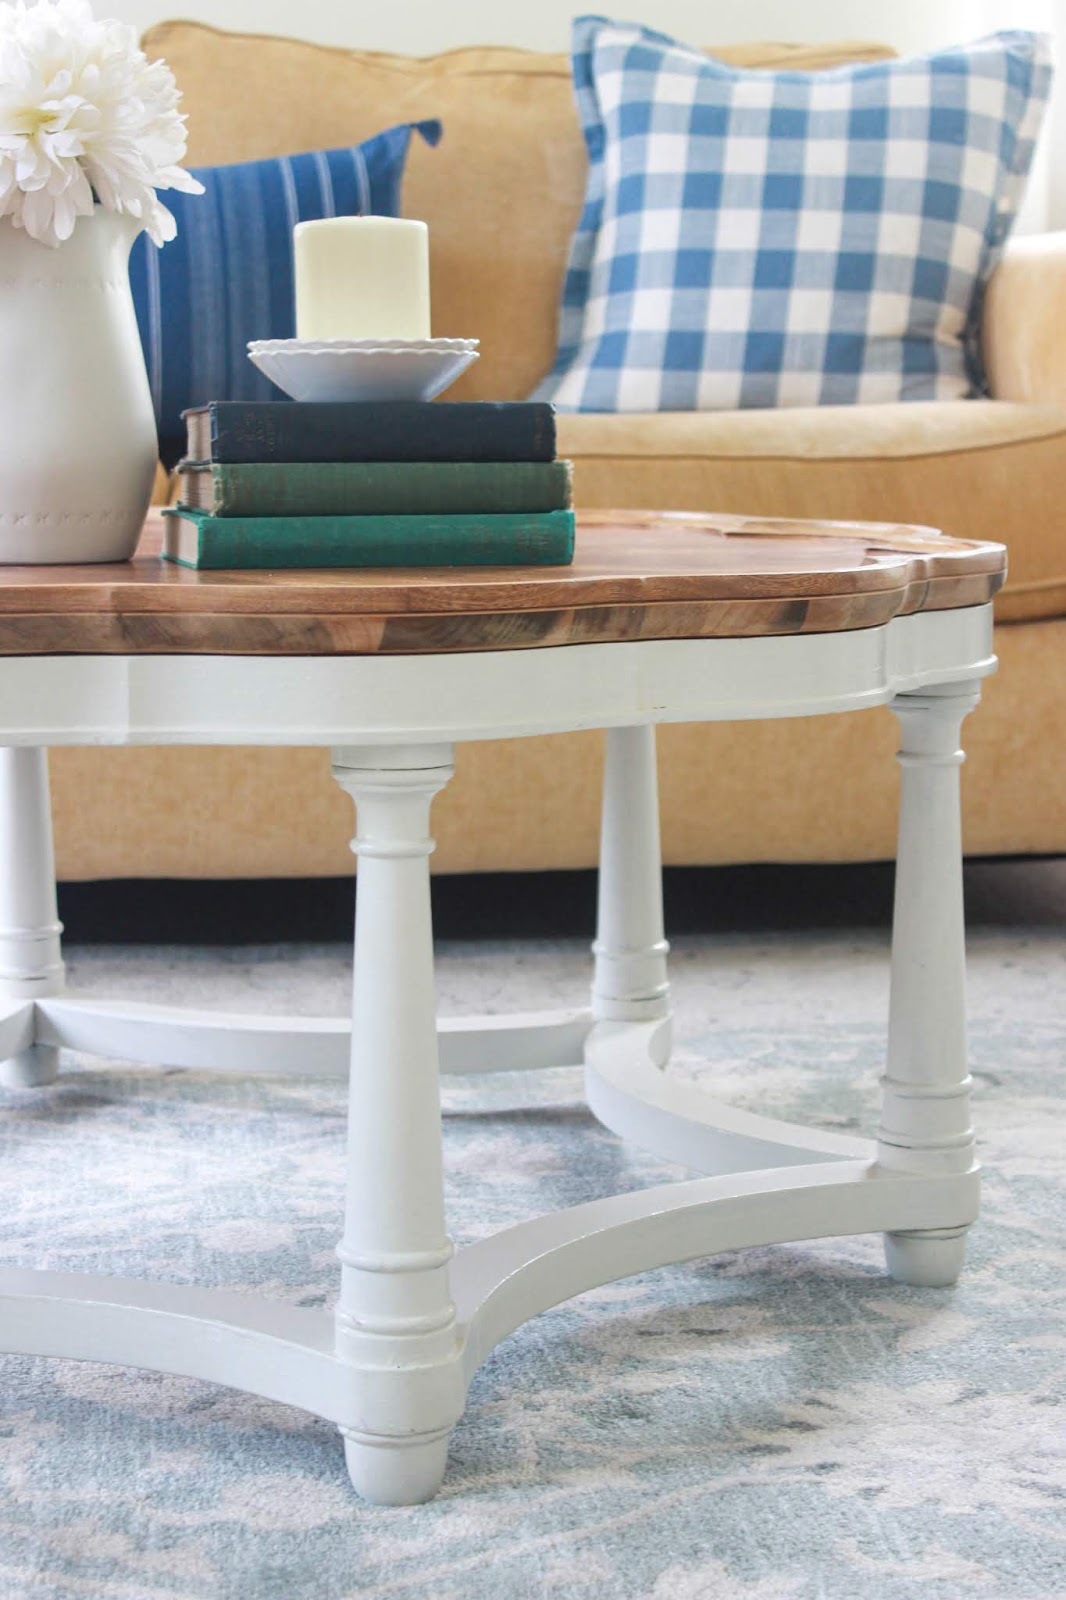 Thrift Store Coffee Table Makeover.